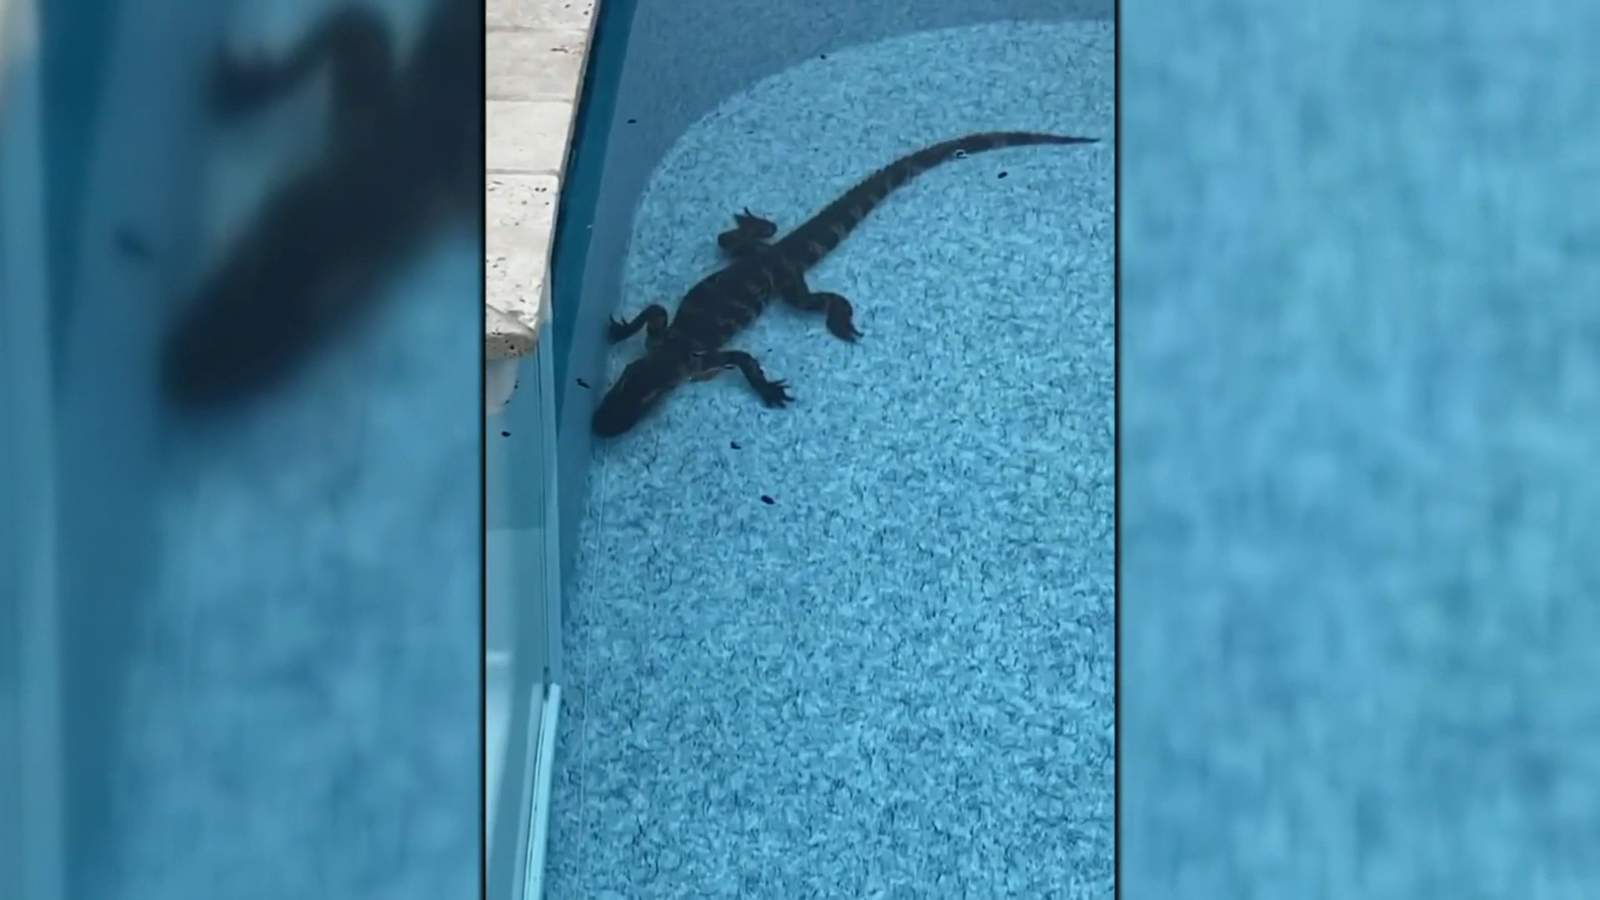 Alabama man wakes up with alligator in pool